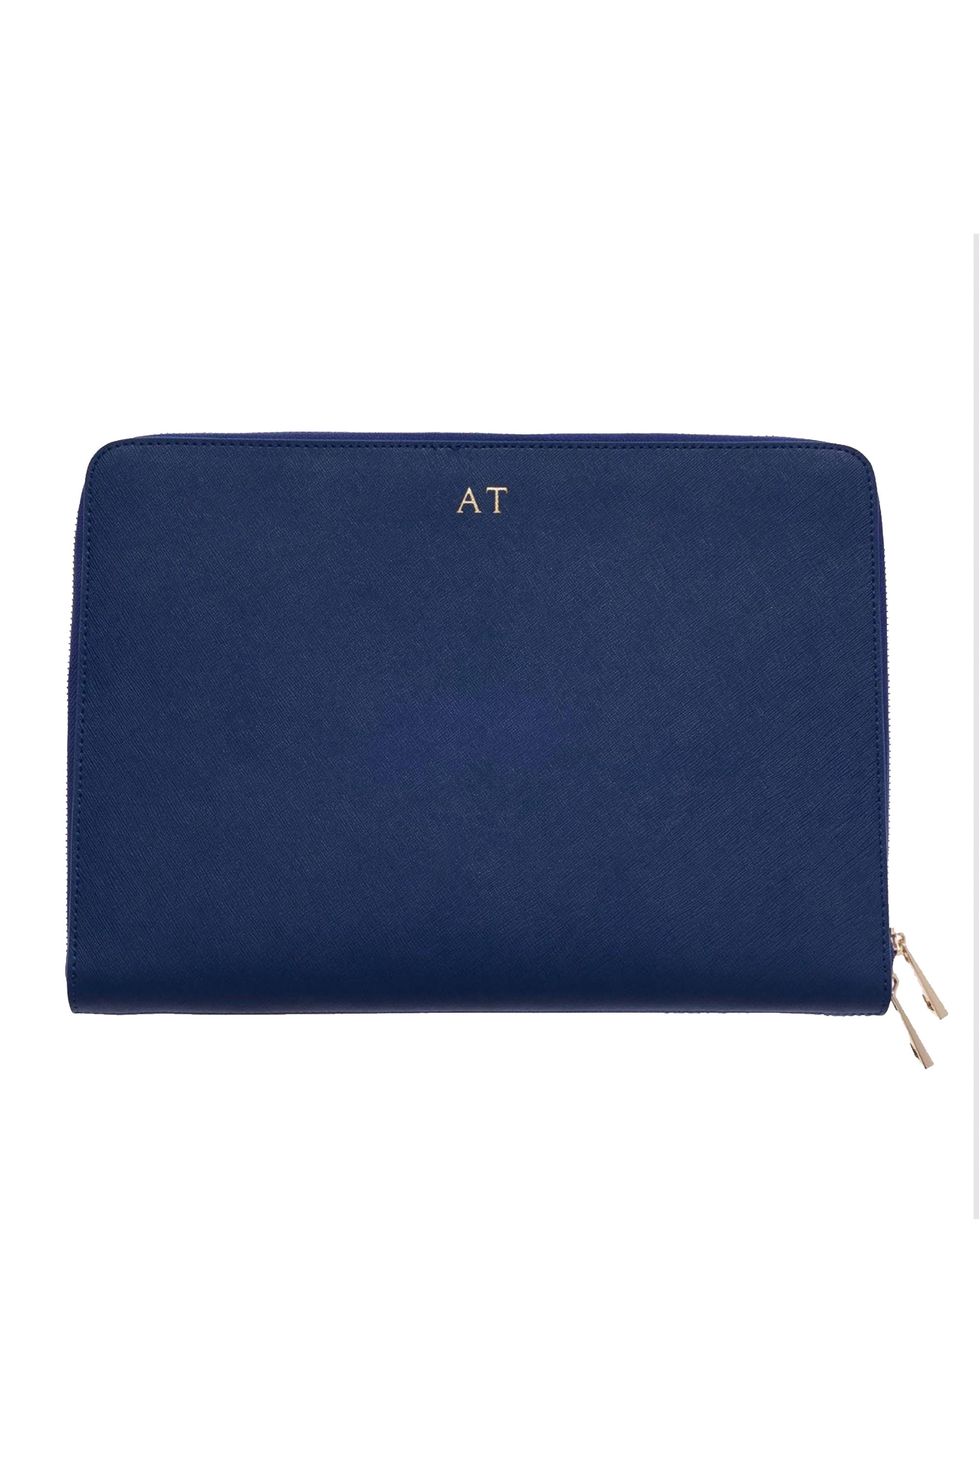 AbChic 10-11 Designer Laptop Sleeve also for 11 Apple MB Air in